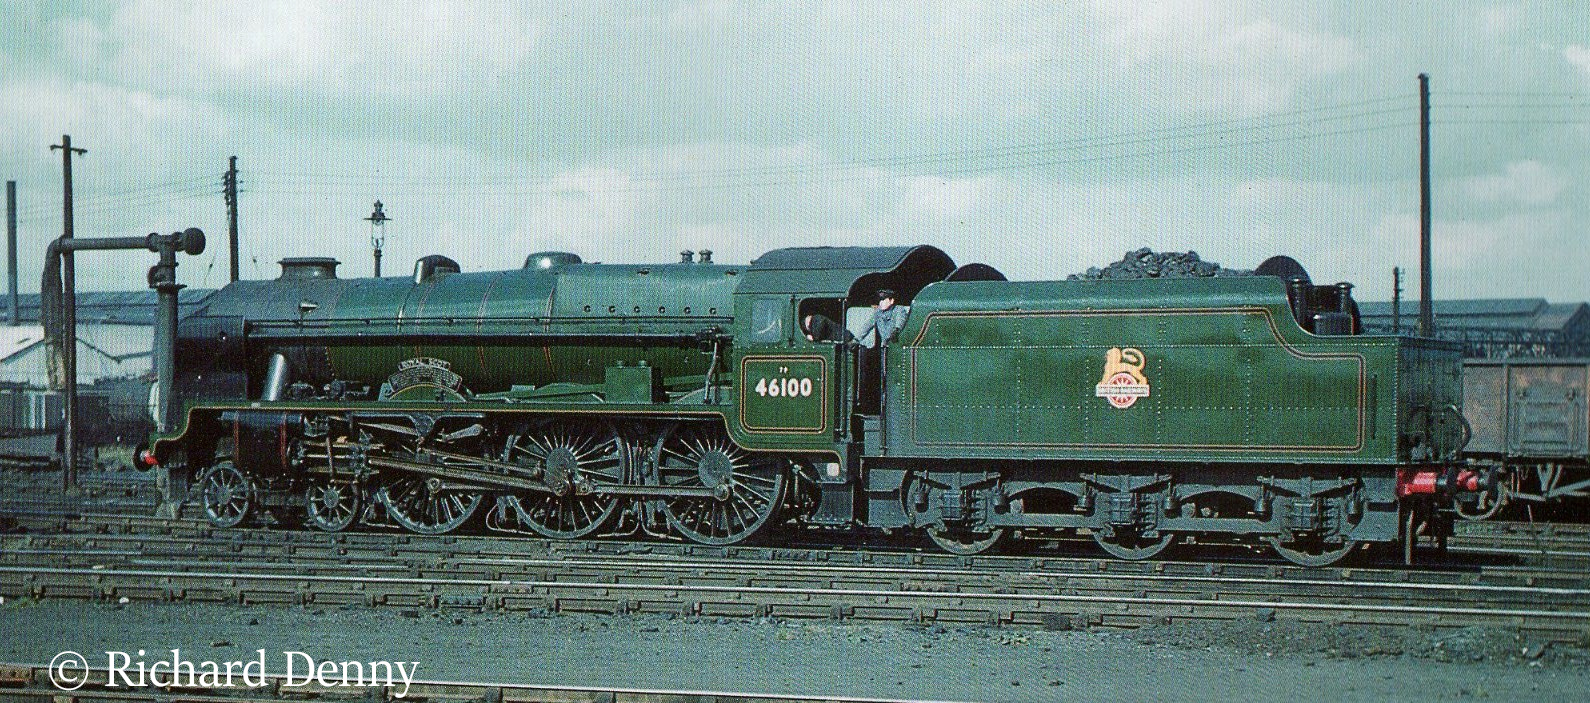 46100 Royal Scot on shed at Derby - 1955.jpg